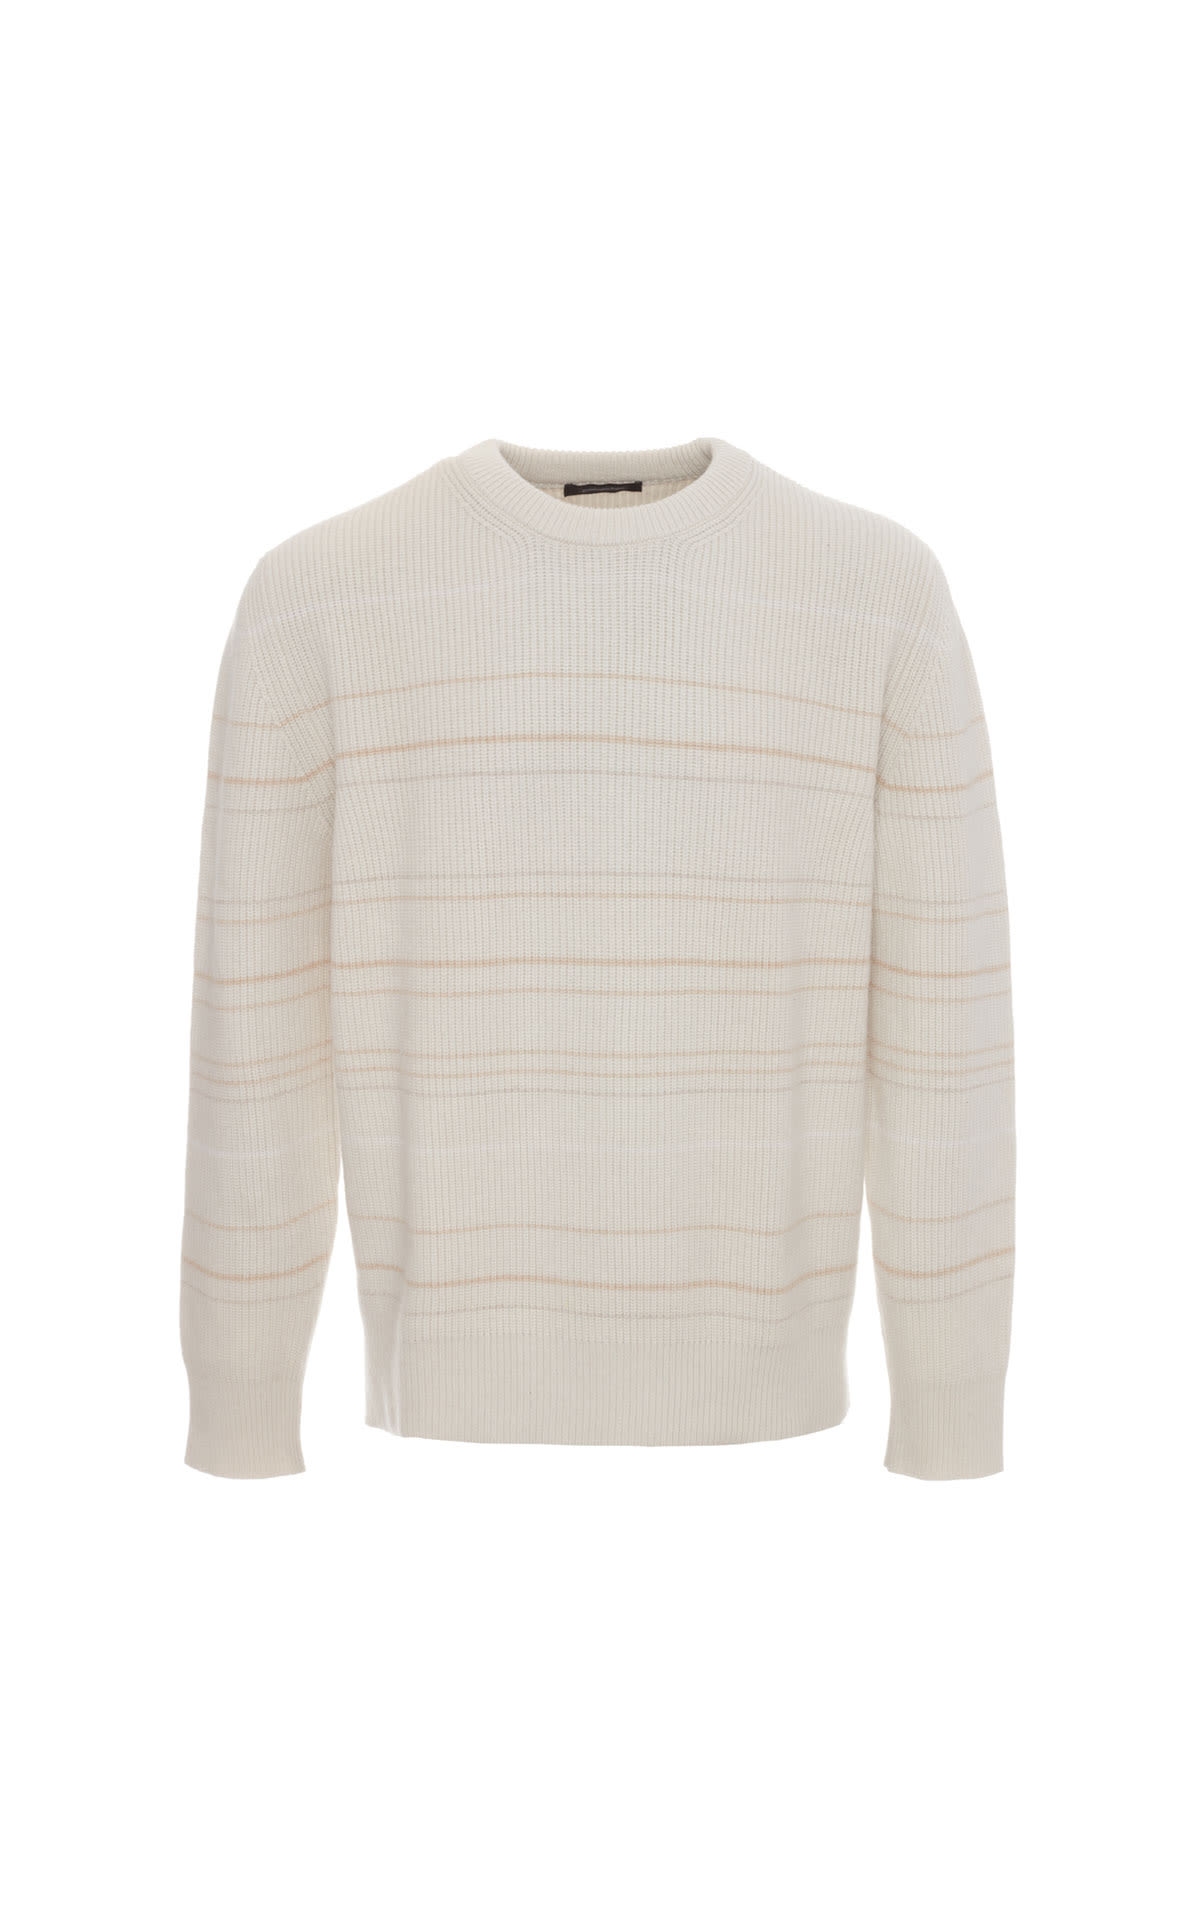 Zegna Chunky lux knit sweater from Bicester Village